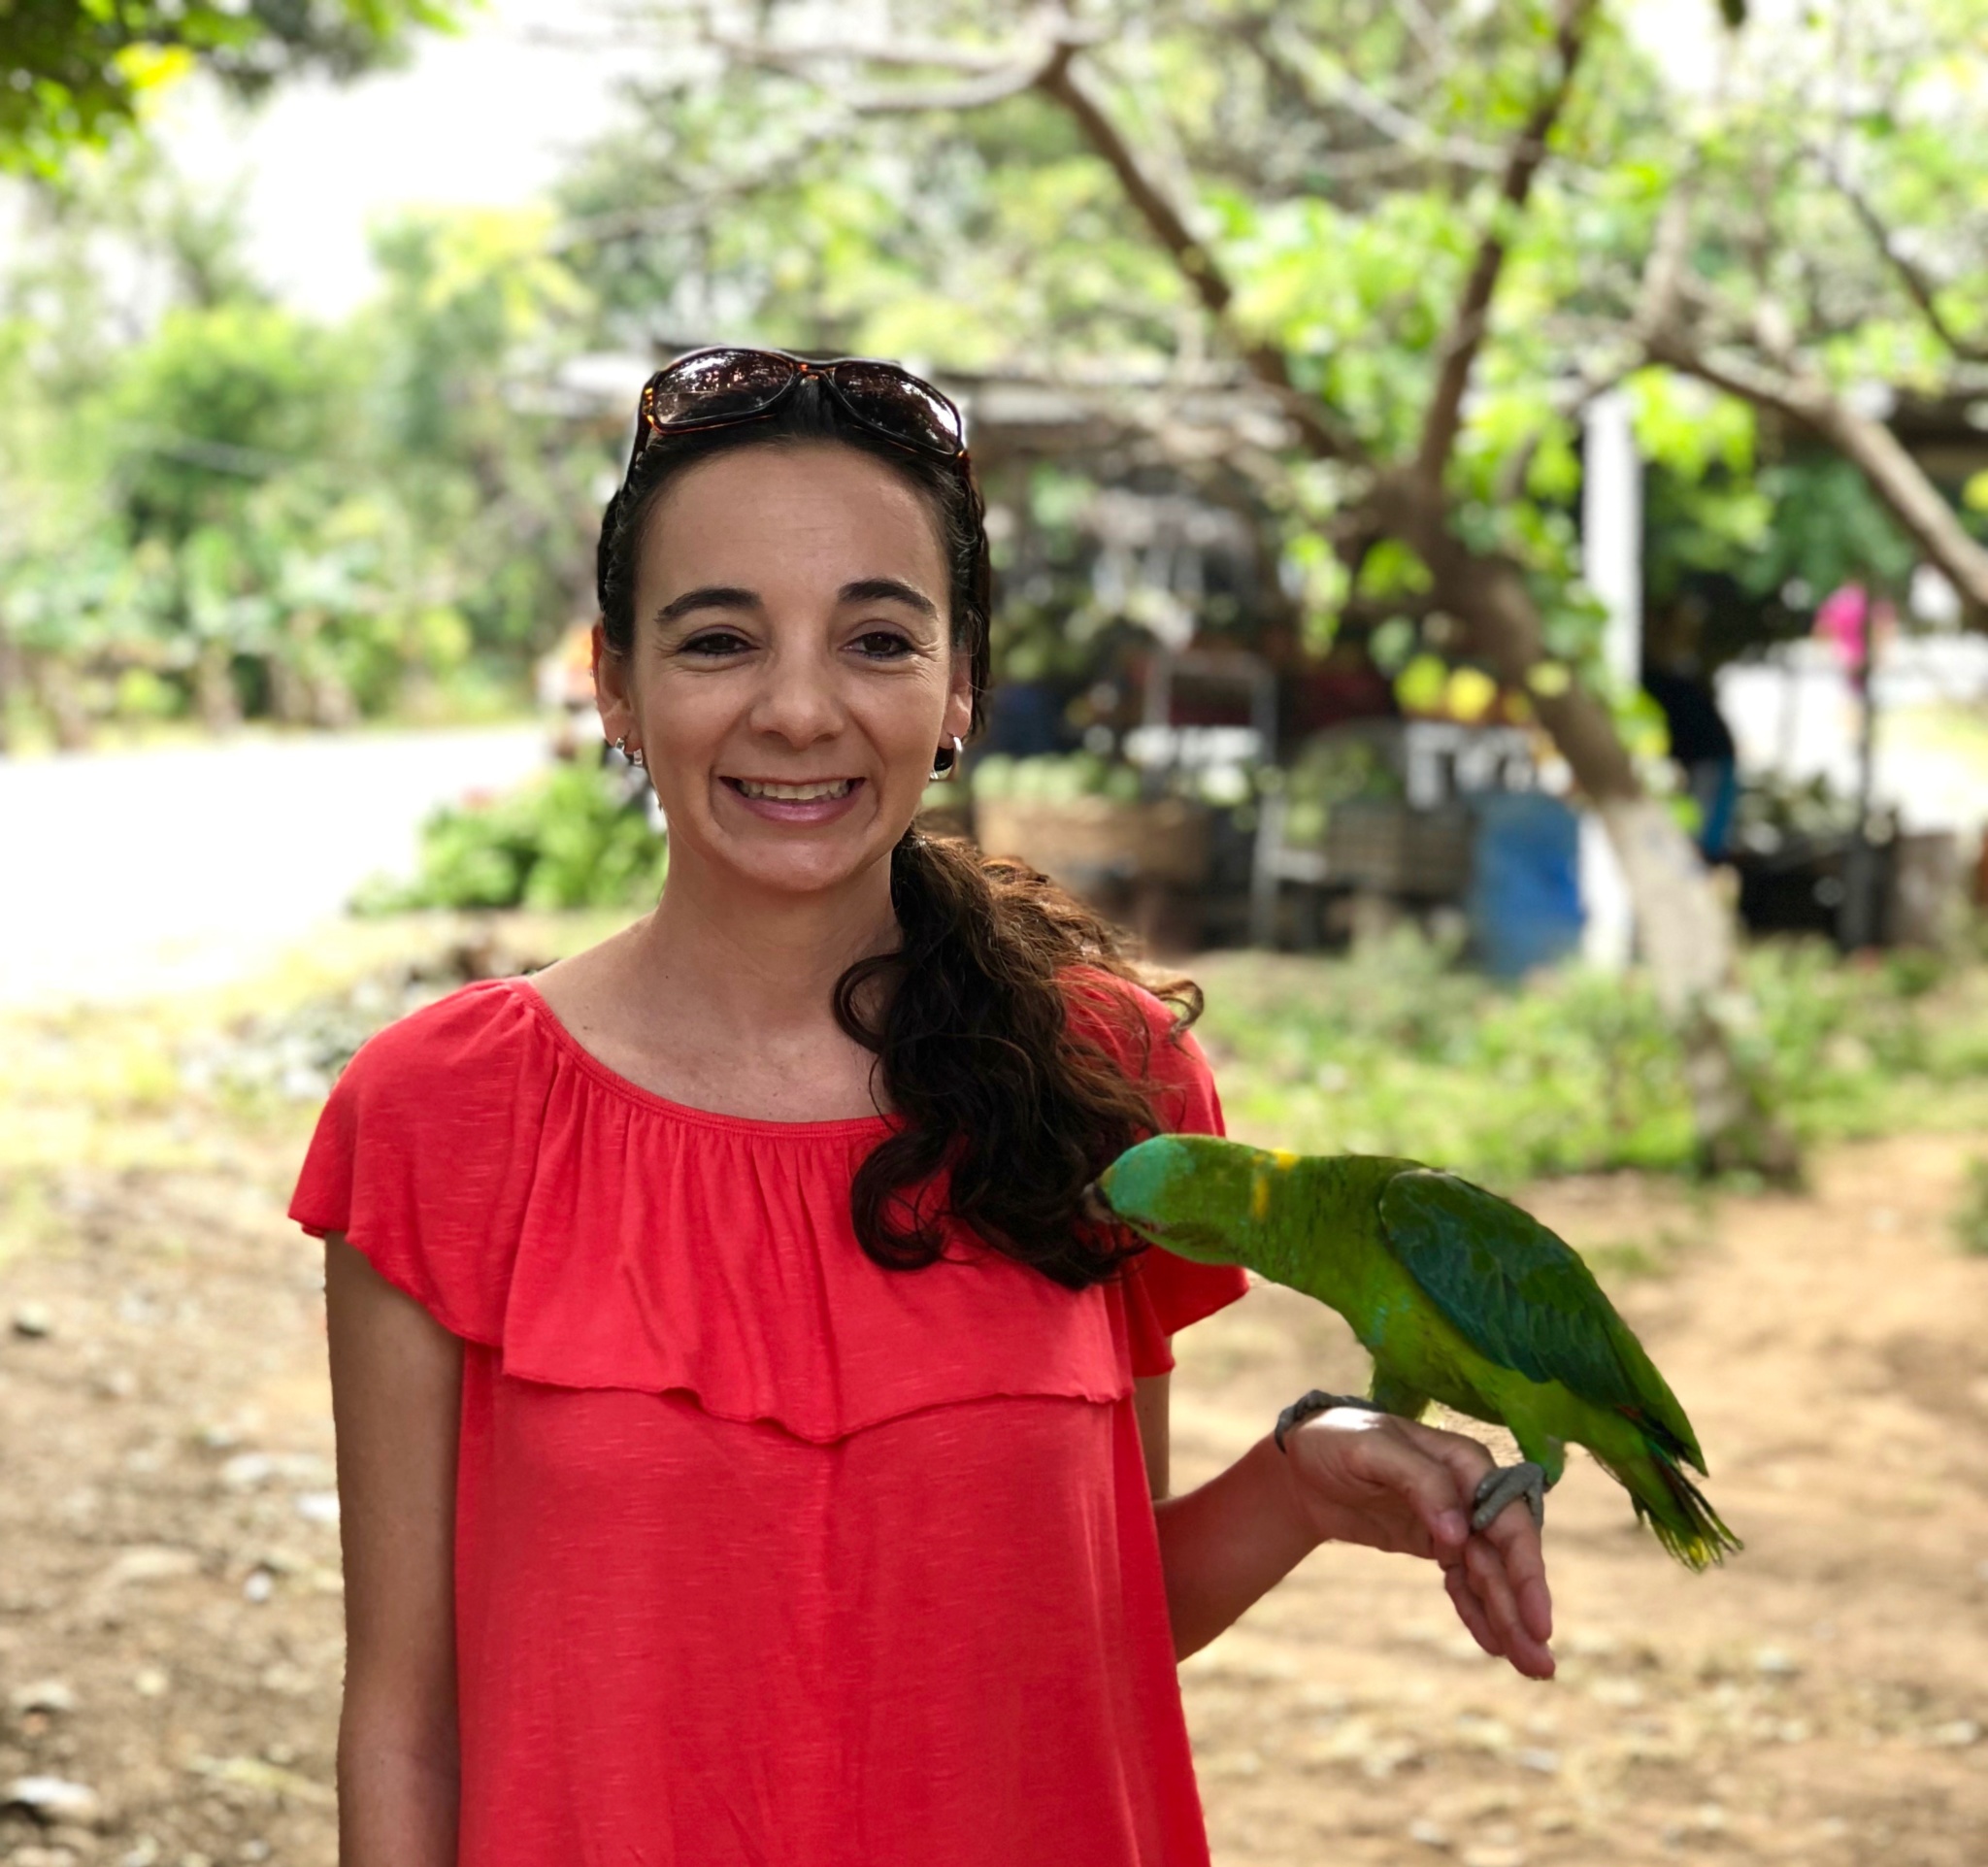 making friends with a local parrot